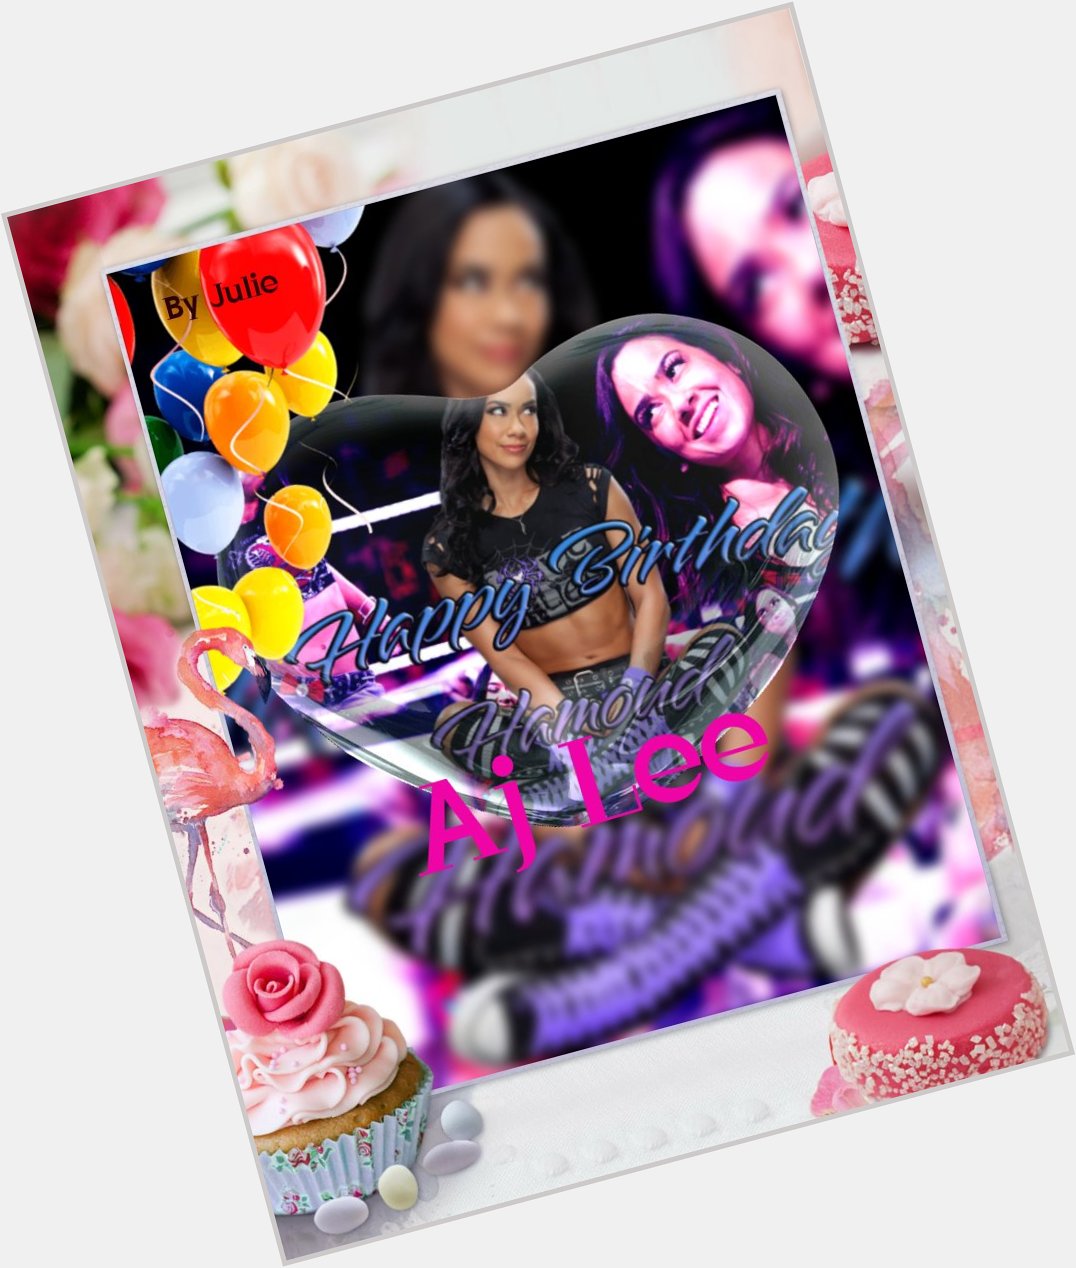 Happy birthday to AJ Lee hope you have a wonderful day   